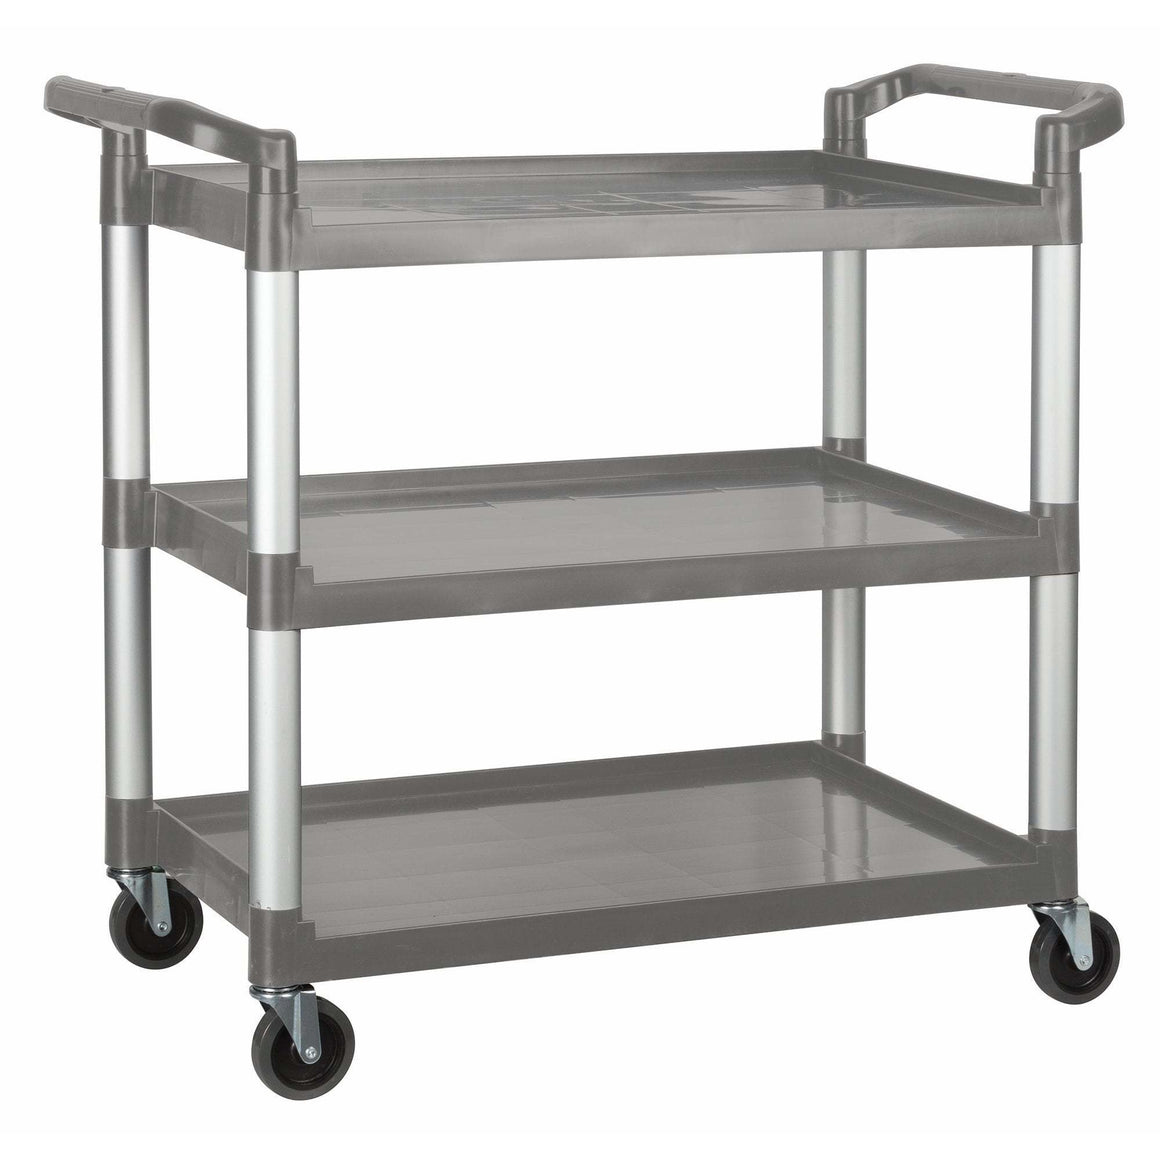 Winco - UC-3019G - Plastic Utility Cart, 40-3/4"L x 19-1/2"W x 37-3/8"H, 3 Tier, Gray - Bussing - Maltese & Co New and Used  restaurant Equipment 